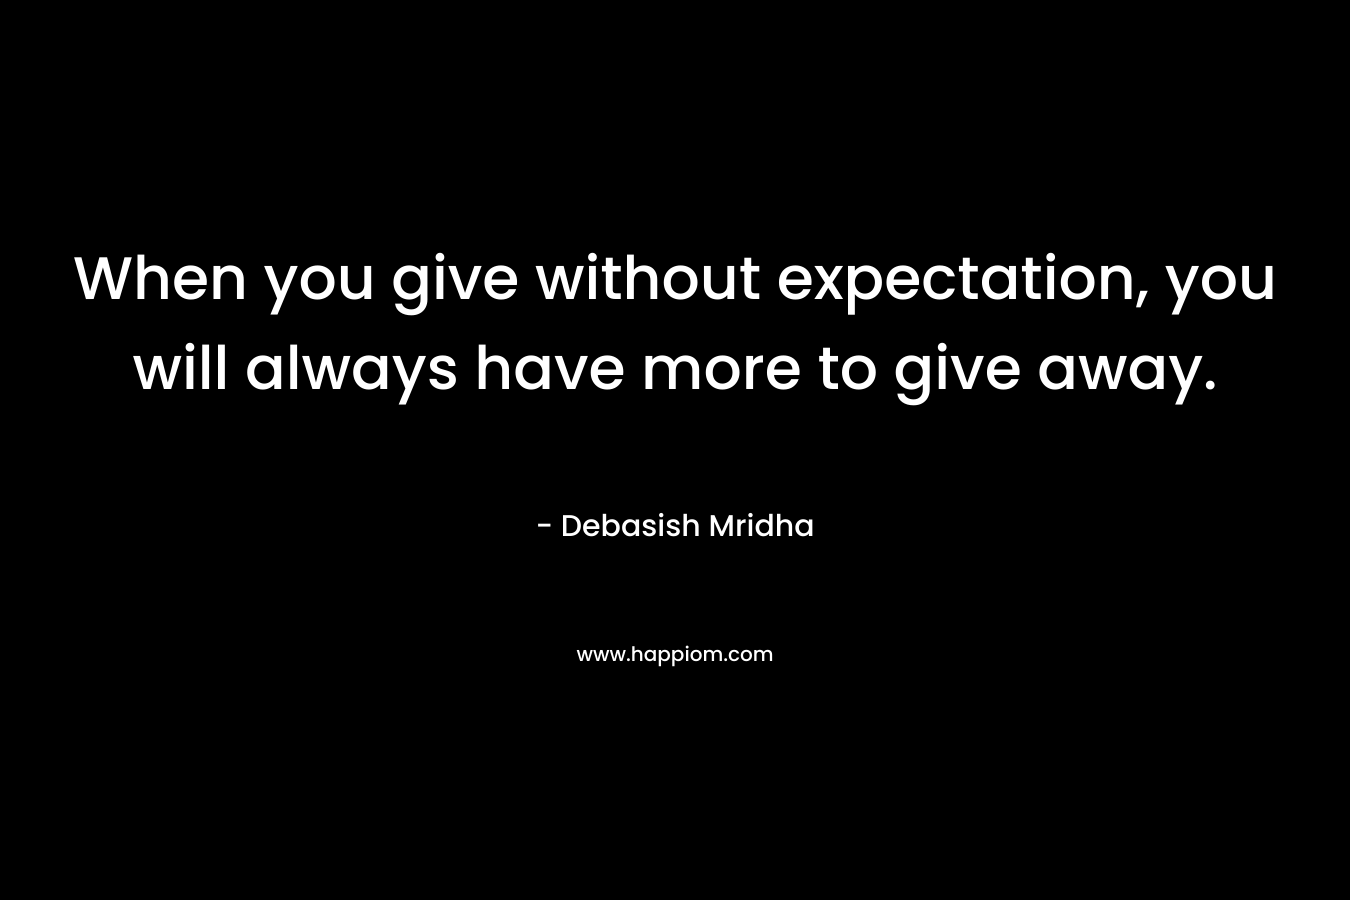 When you give without expectation, you will always have more to give away.